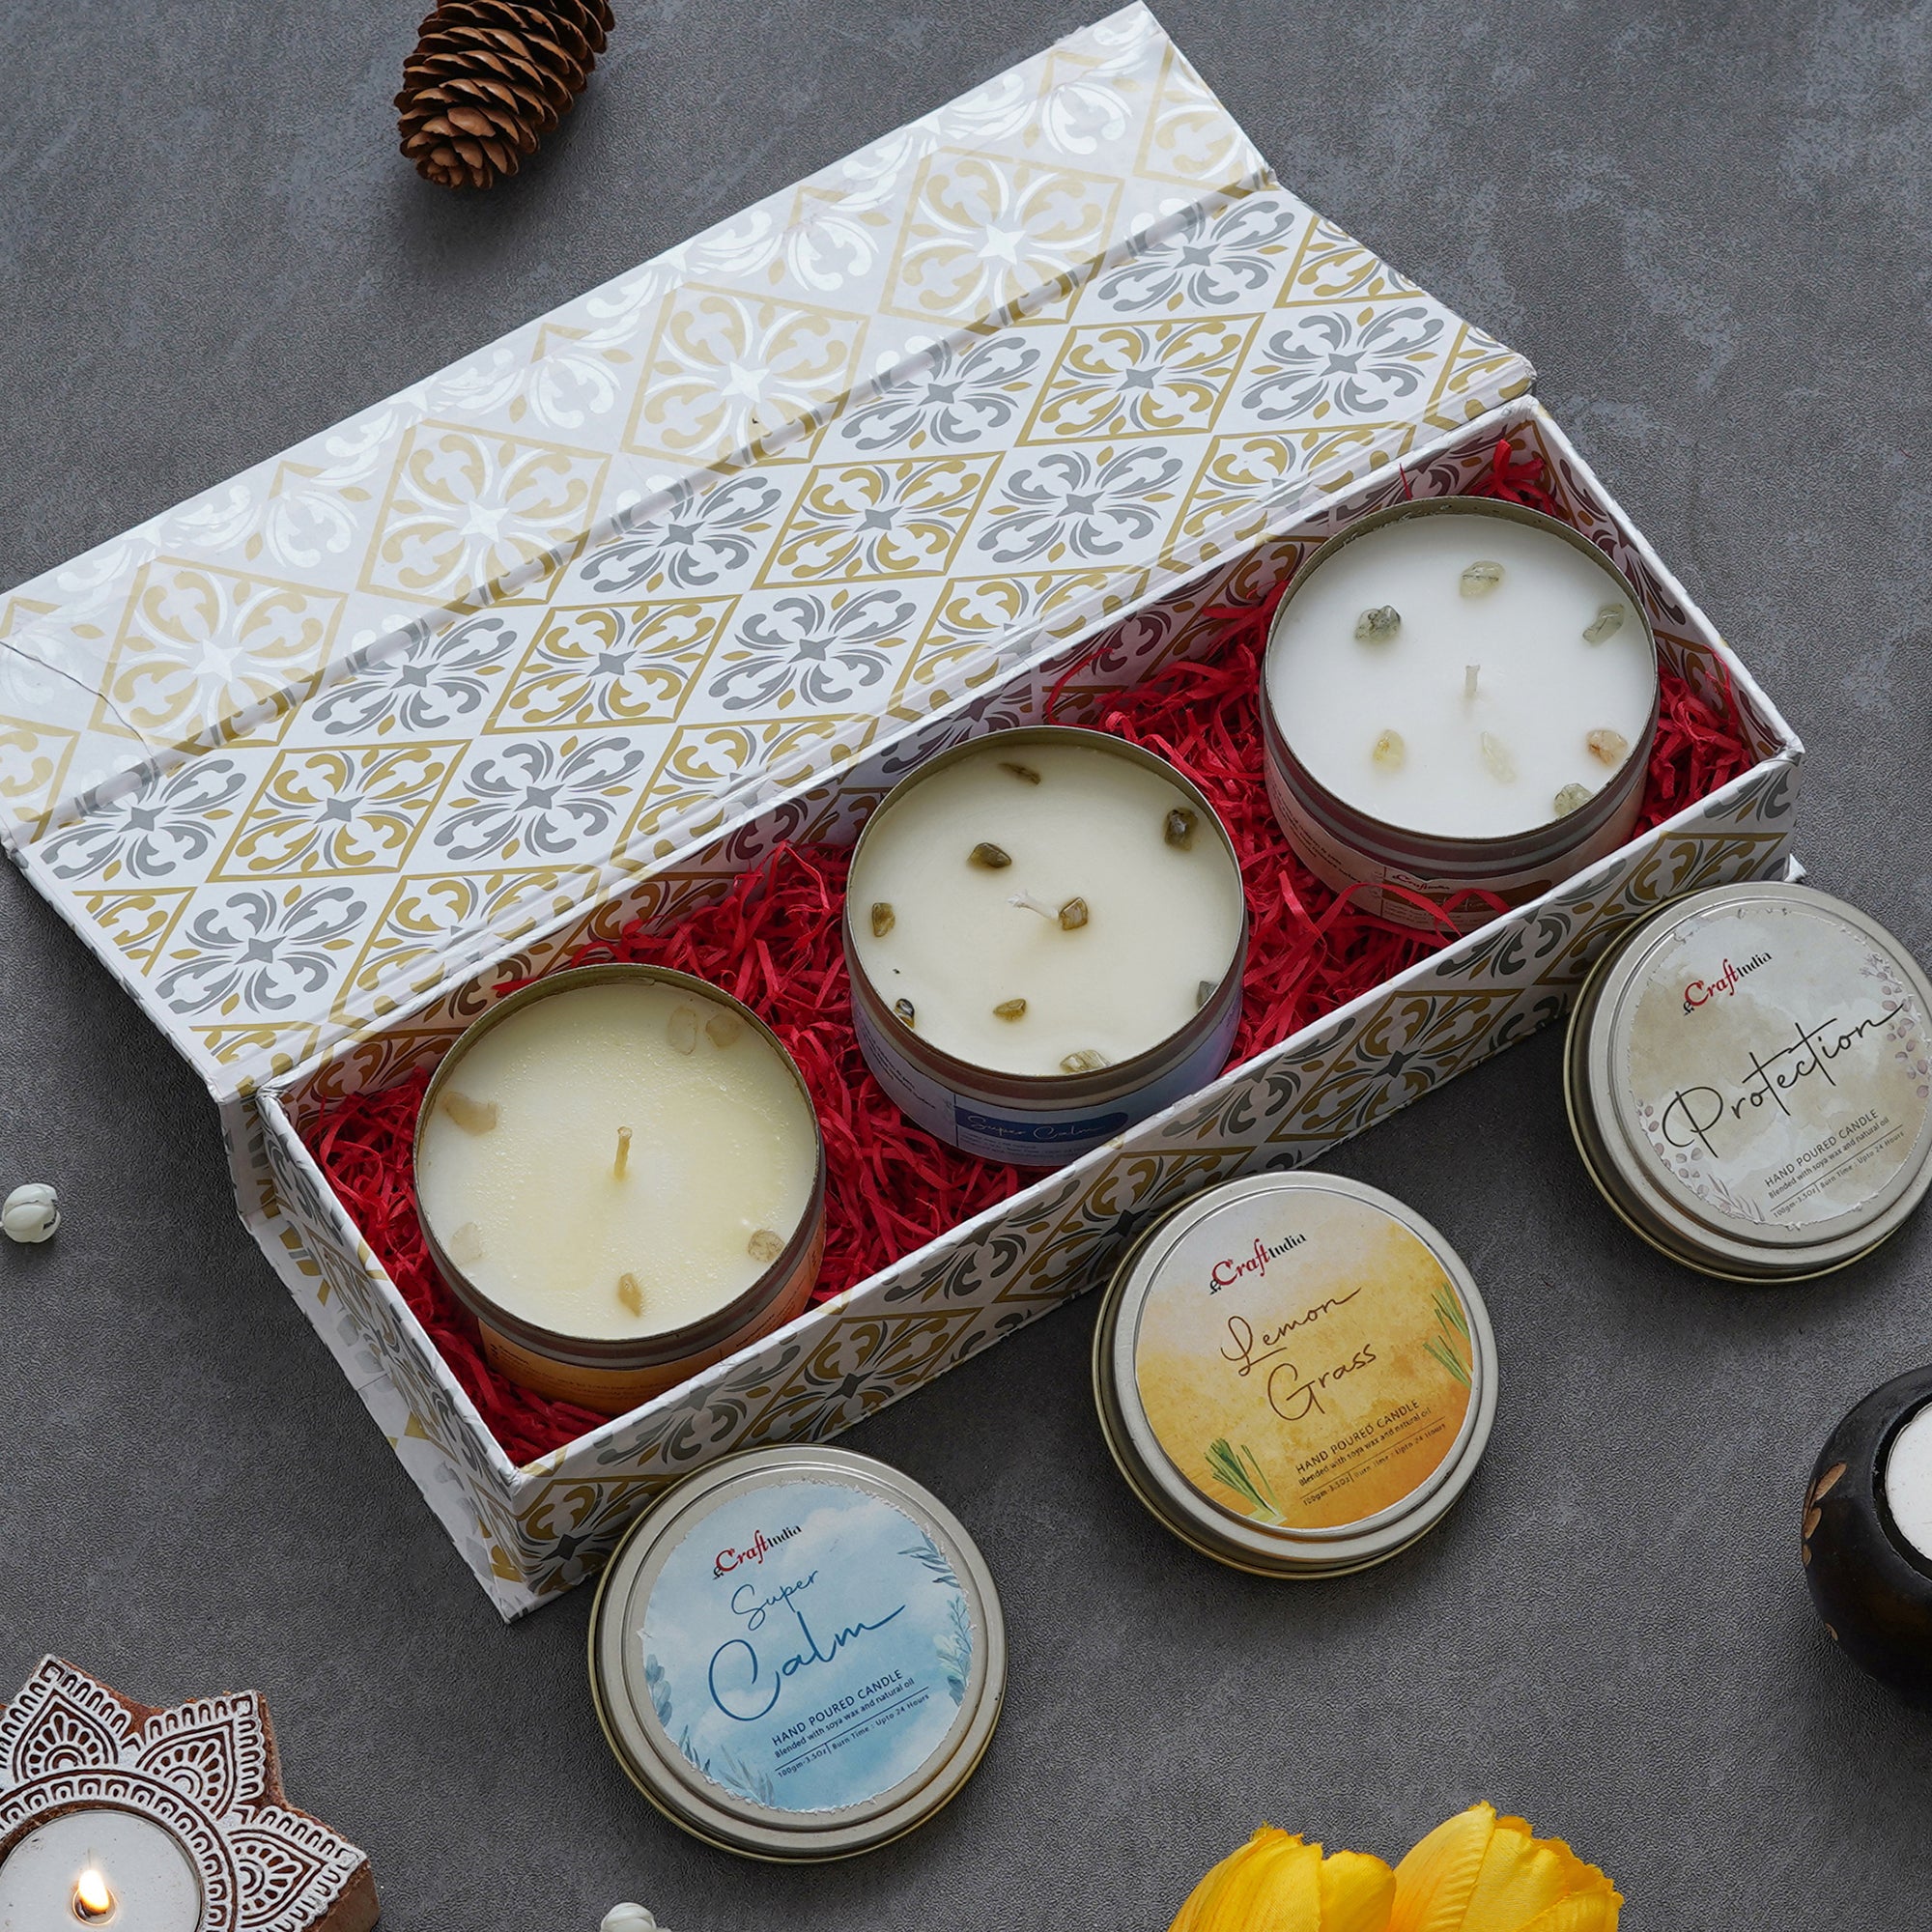 eCraftIndia The Scented Gift Box - Set of 3 Jars Super Calm, Lemon Grass, Protection Hand Poured Soya Wax Candles